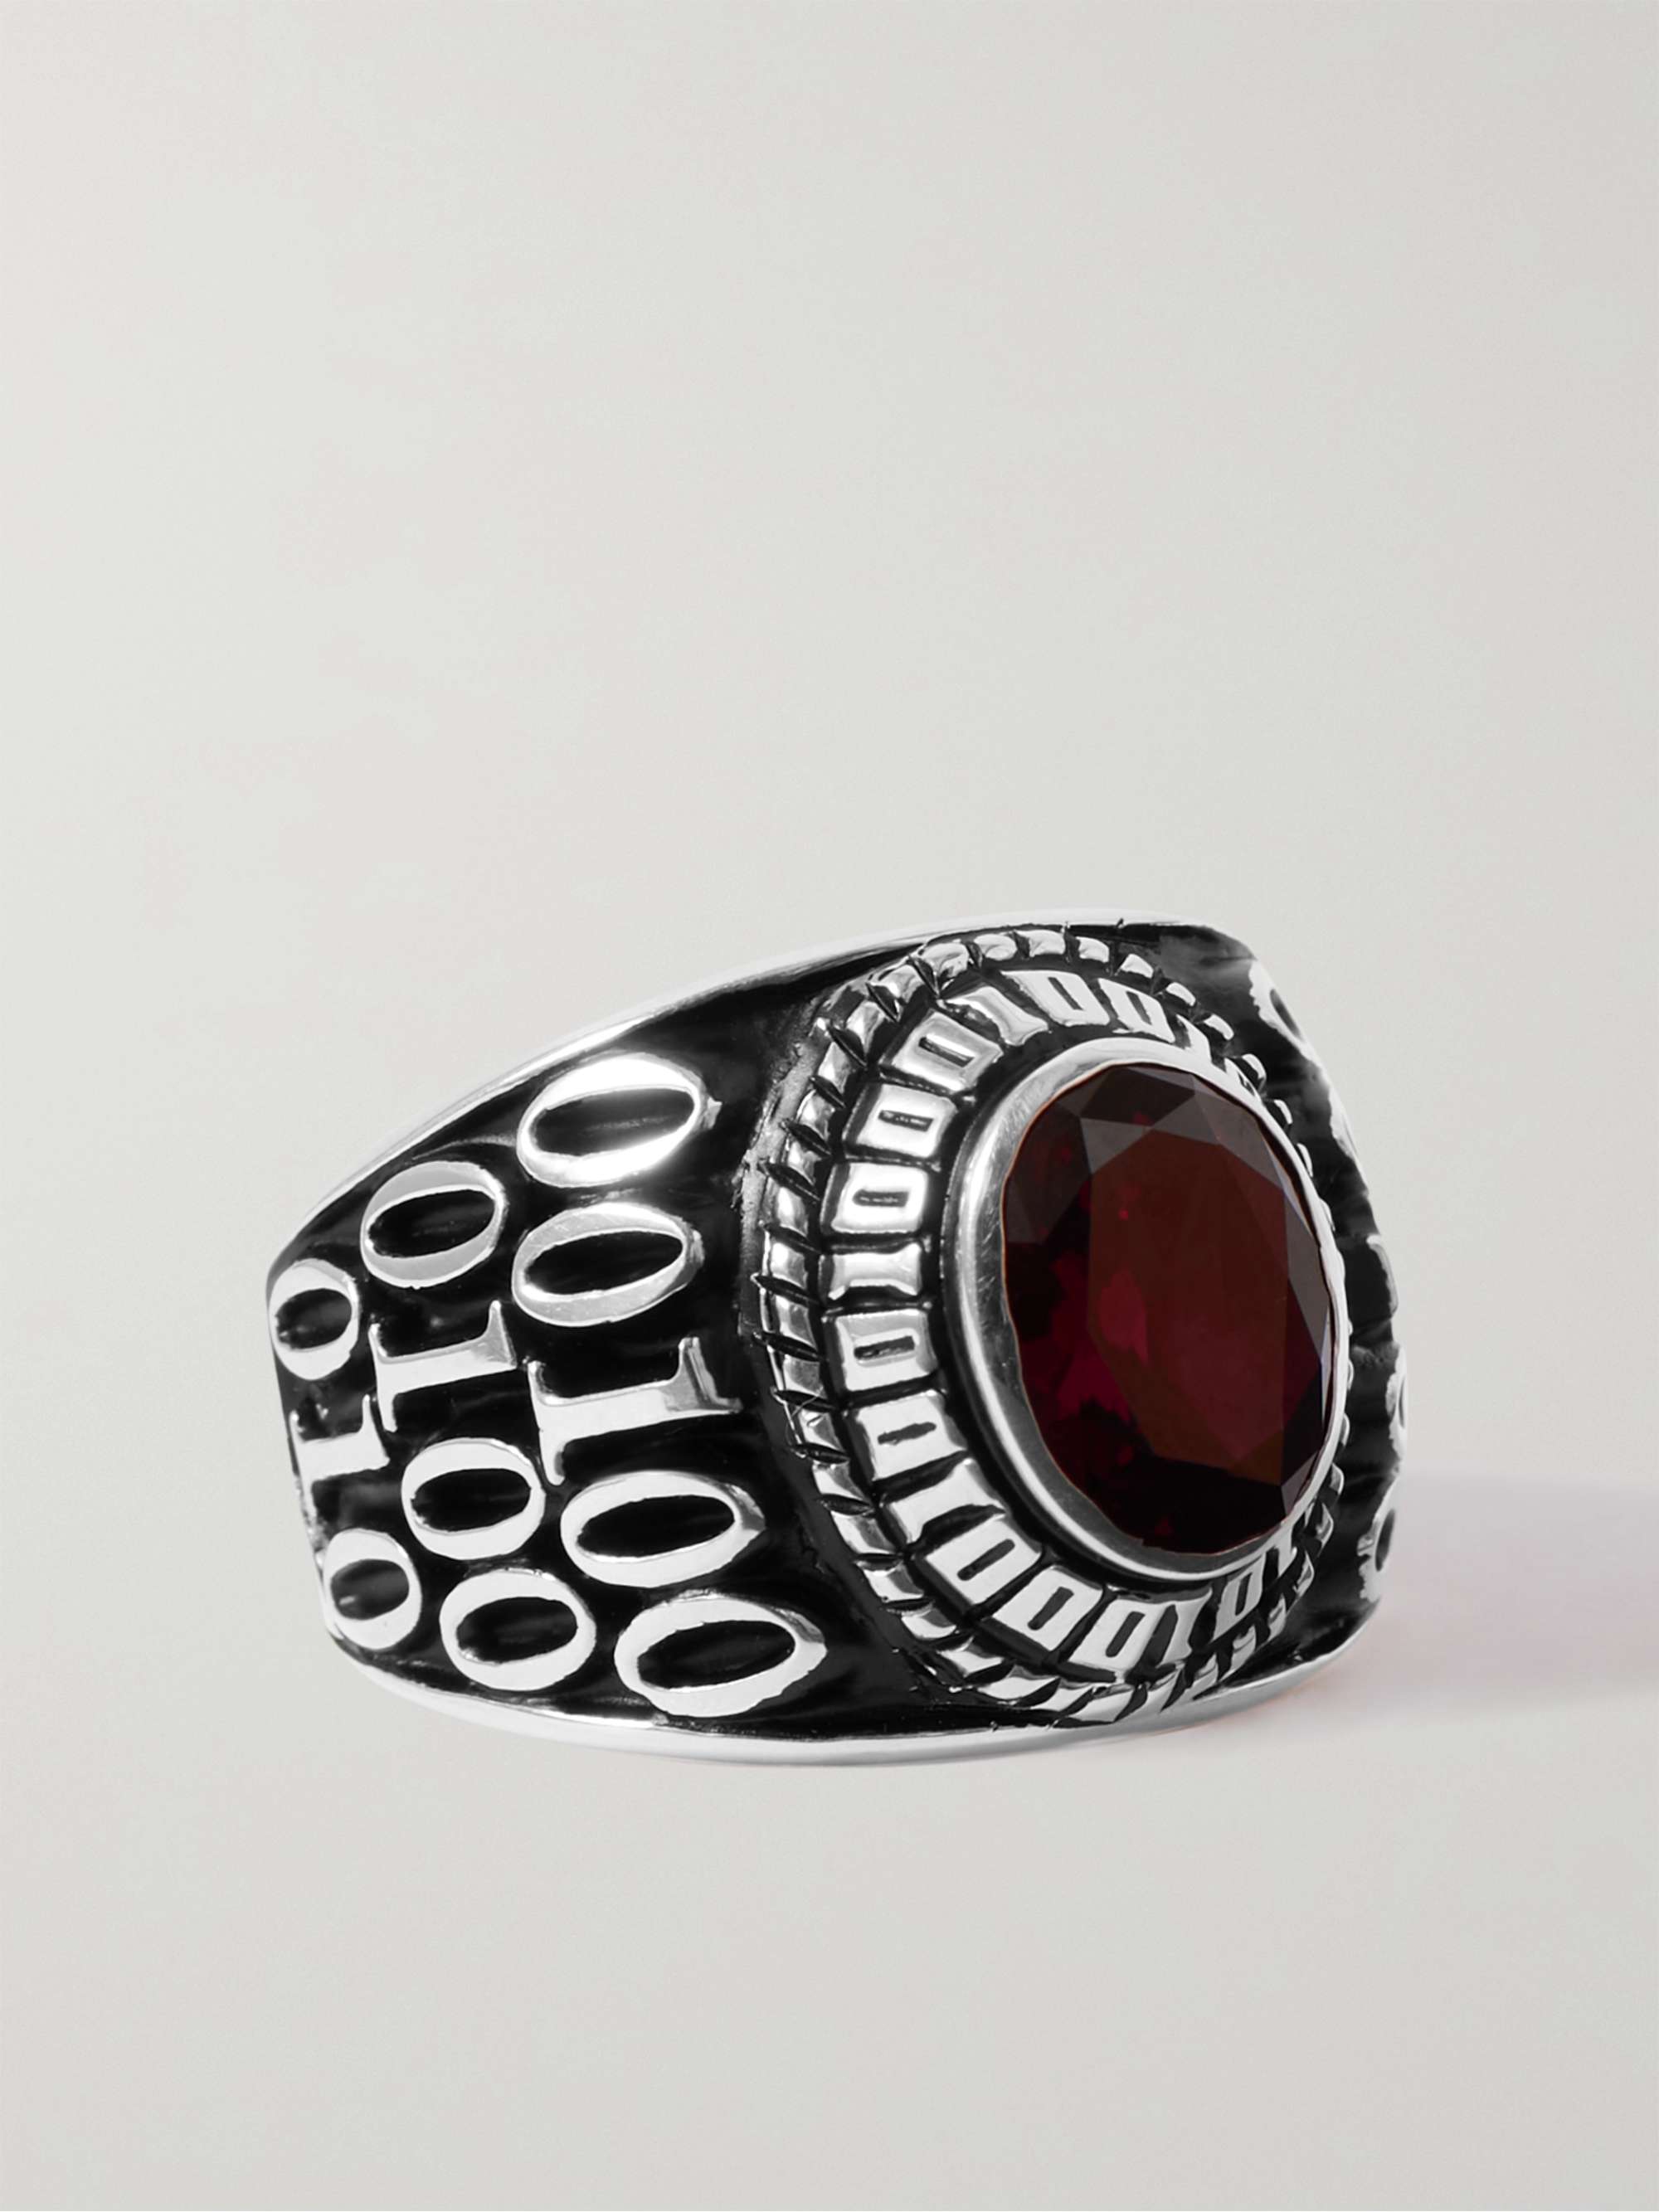 JAM HOMEMADE College Burnished Sterling Silver and Glass Ring